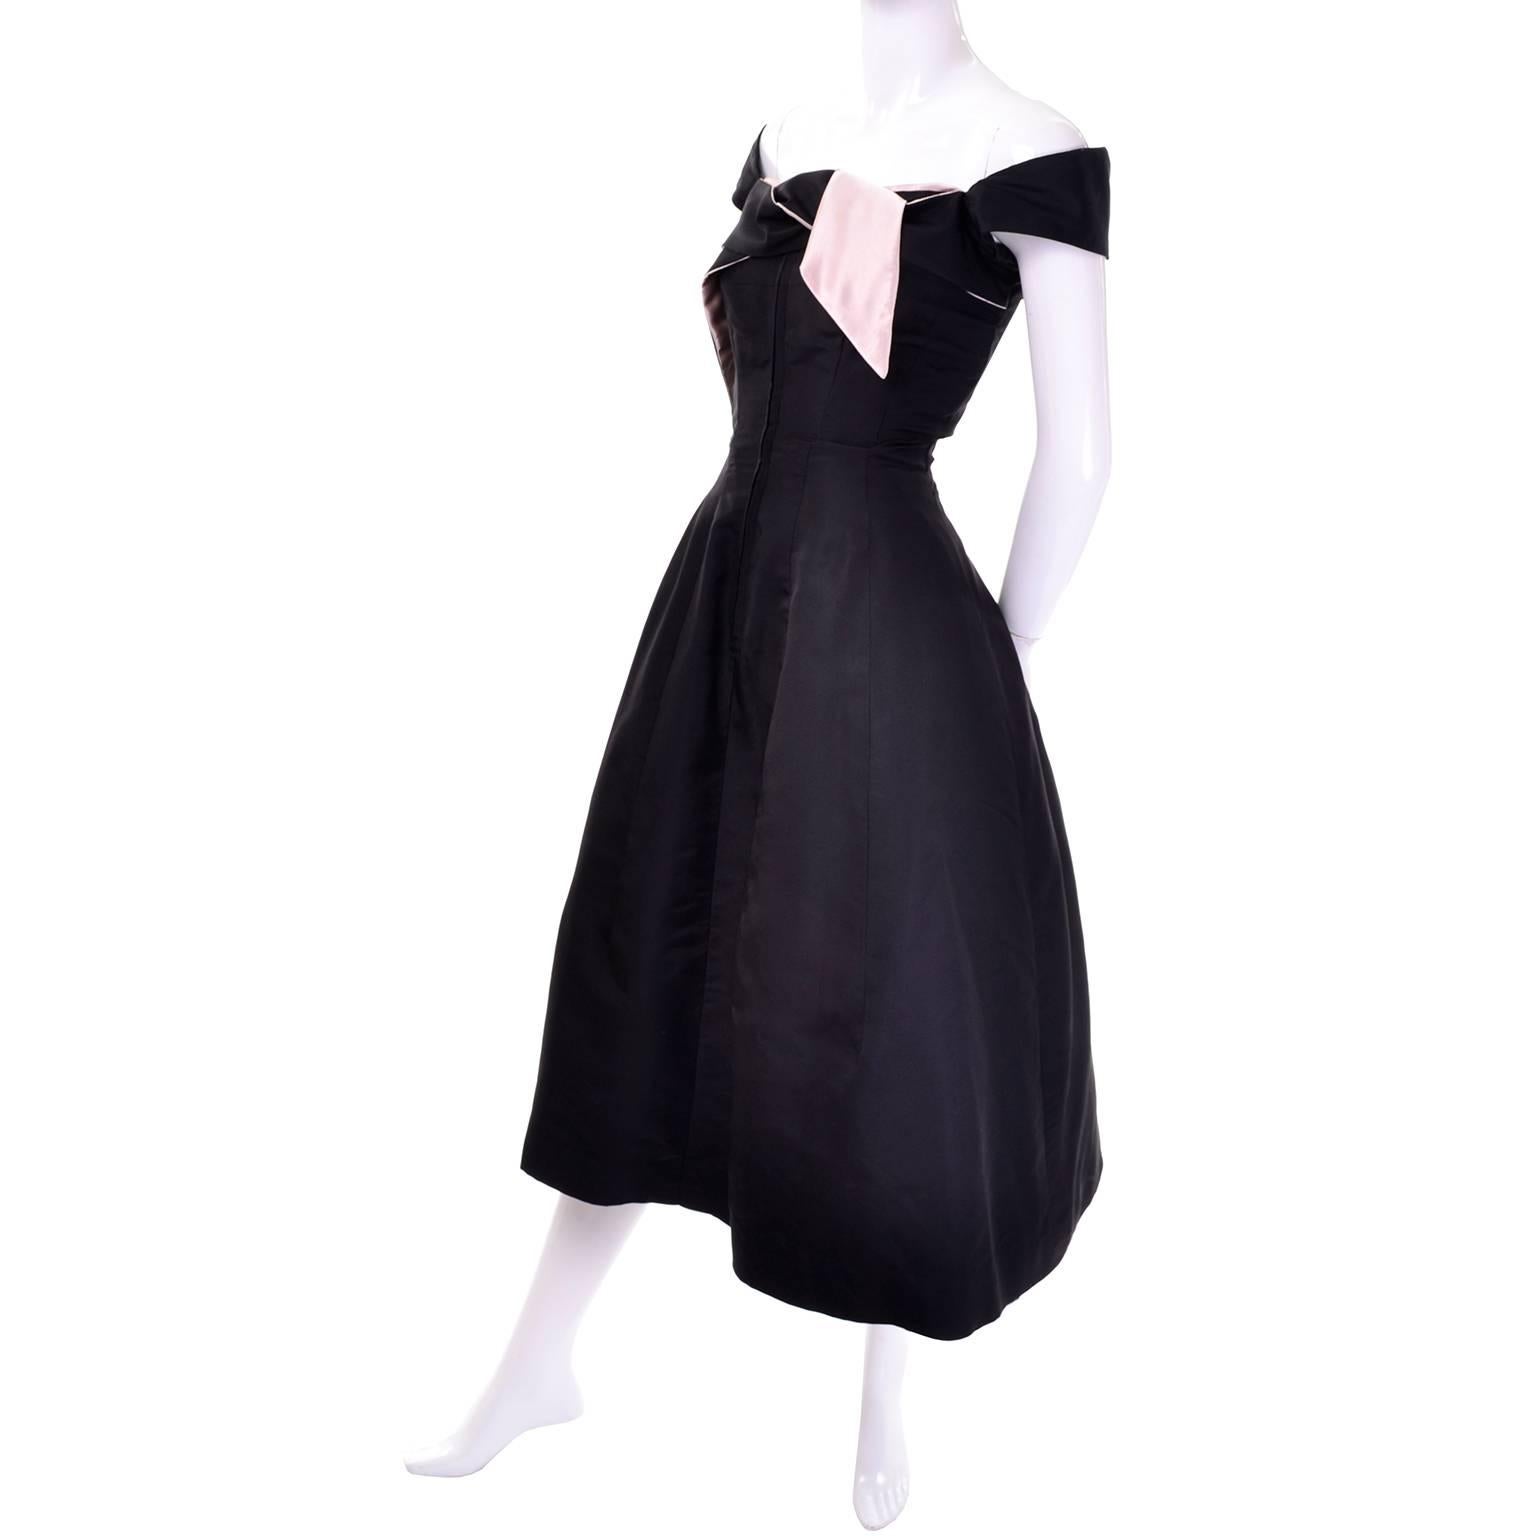 This rare late 1940's vintage Nettie Rosenstein silk faille dress is from an estate we acquired that included every important designer from the mid 20th century through the 1970's.  This dress zips up the front and has an attached sash at the bodice